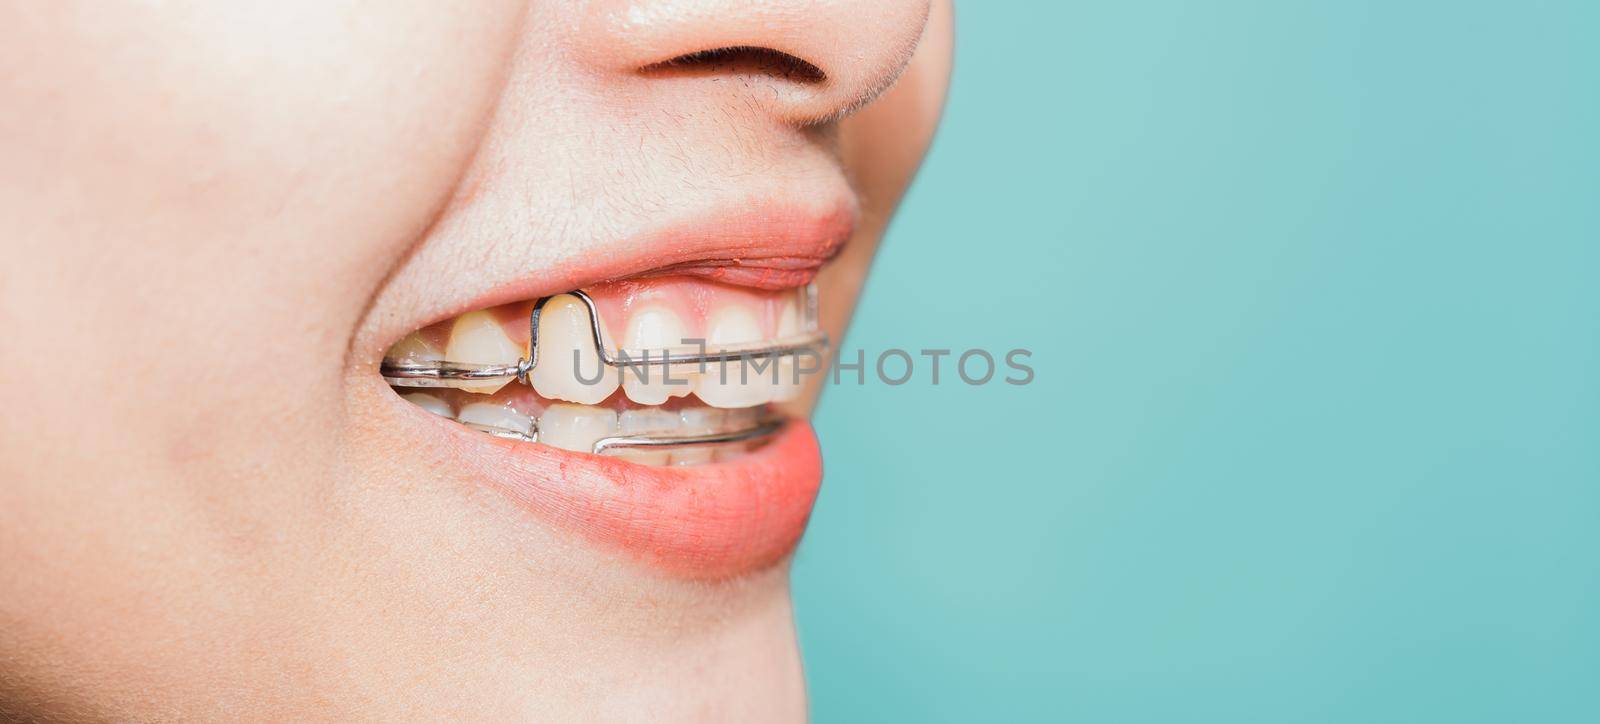 Close up white teeth of young Asian beautiful woman smiling wear silicone orthodontic retainers on teeth isolated on blue background, retaining tools after removable braces. Dental hygiene health